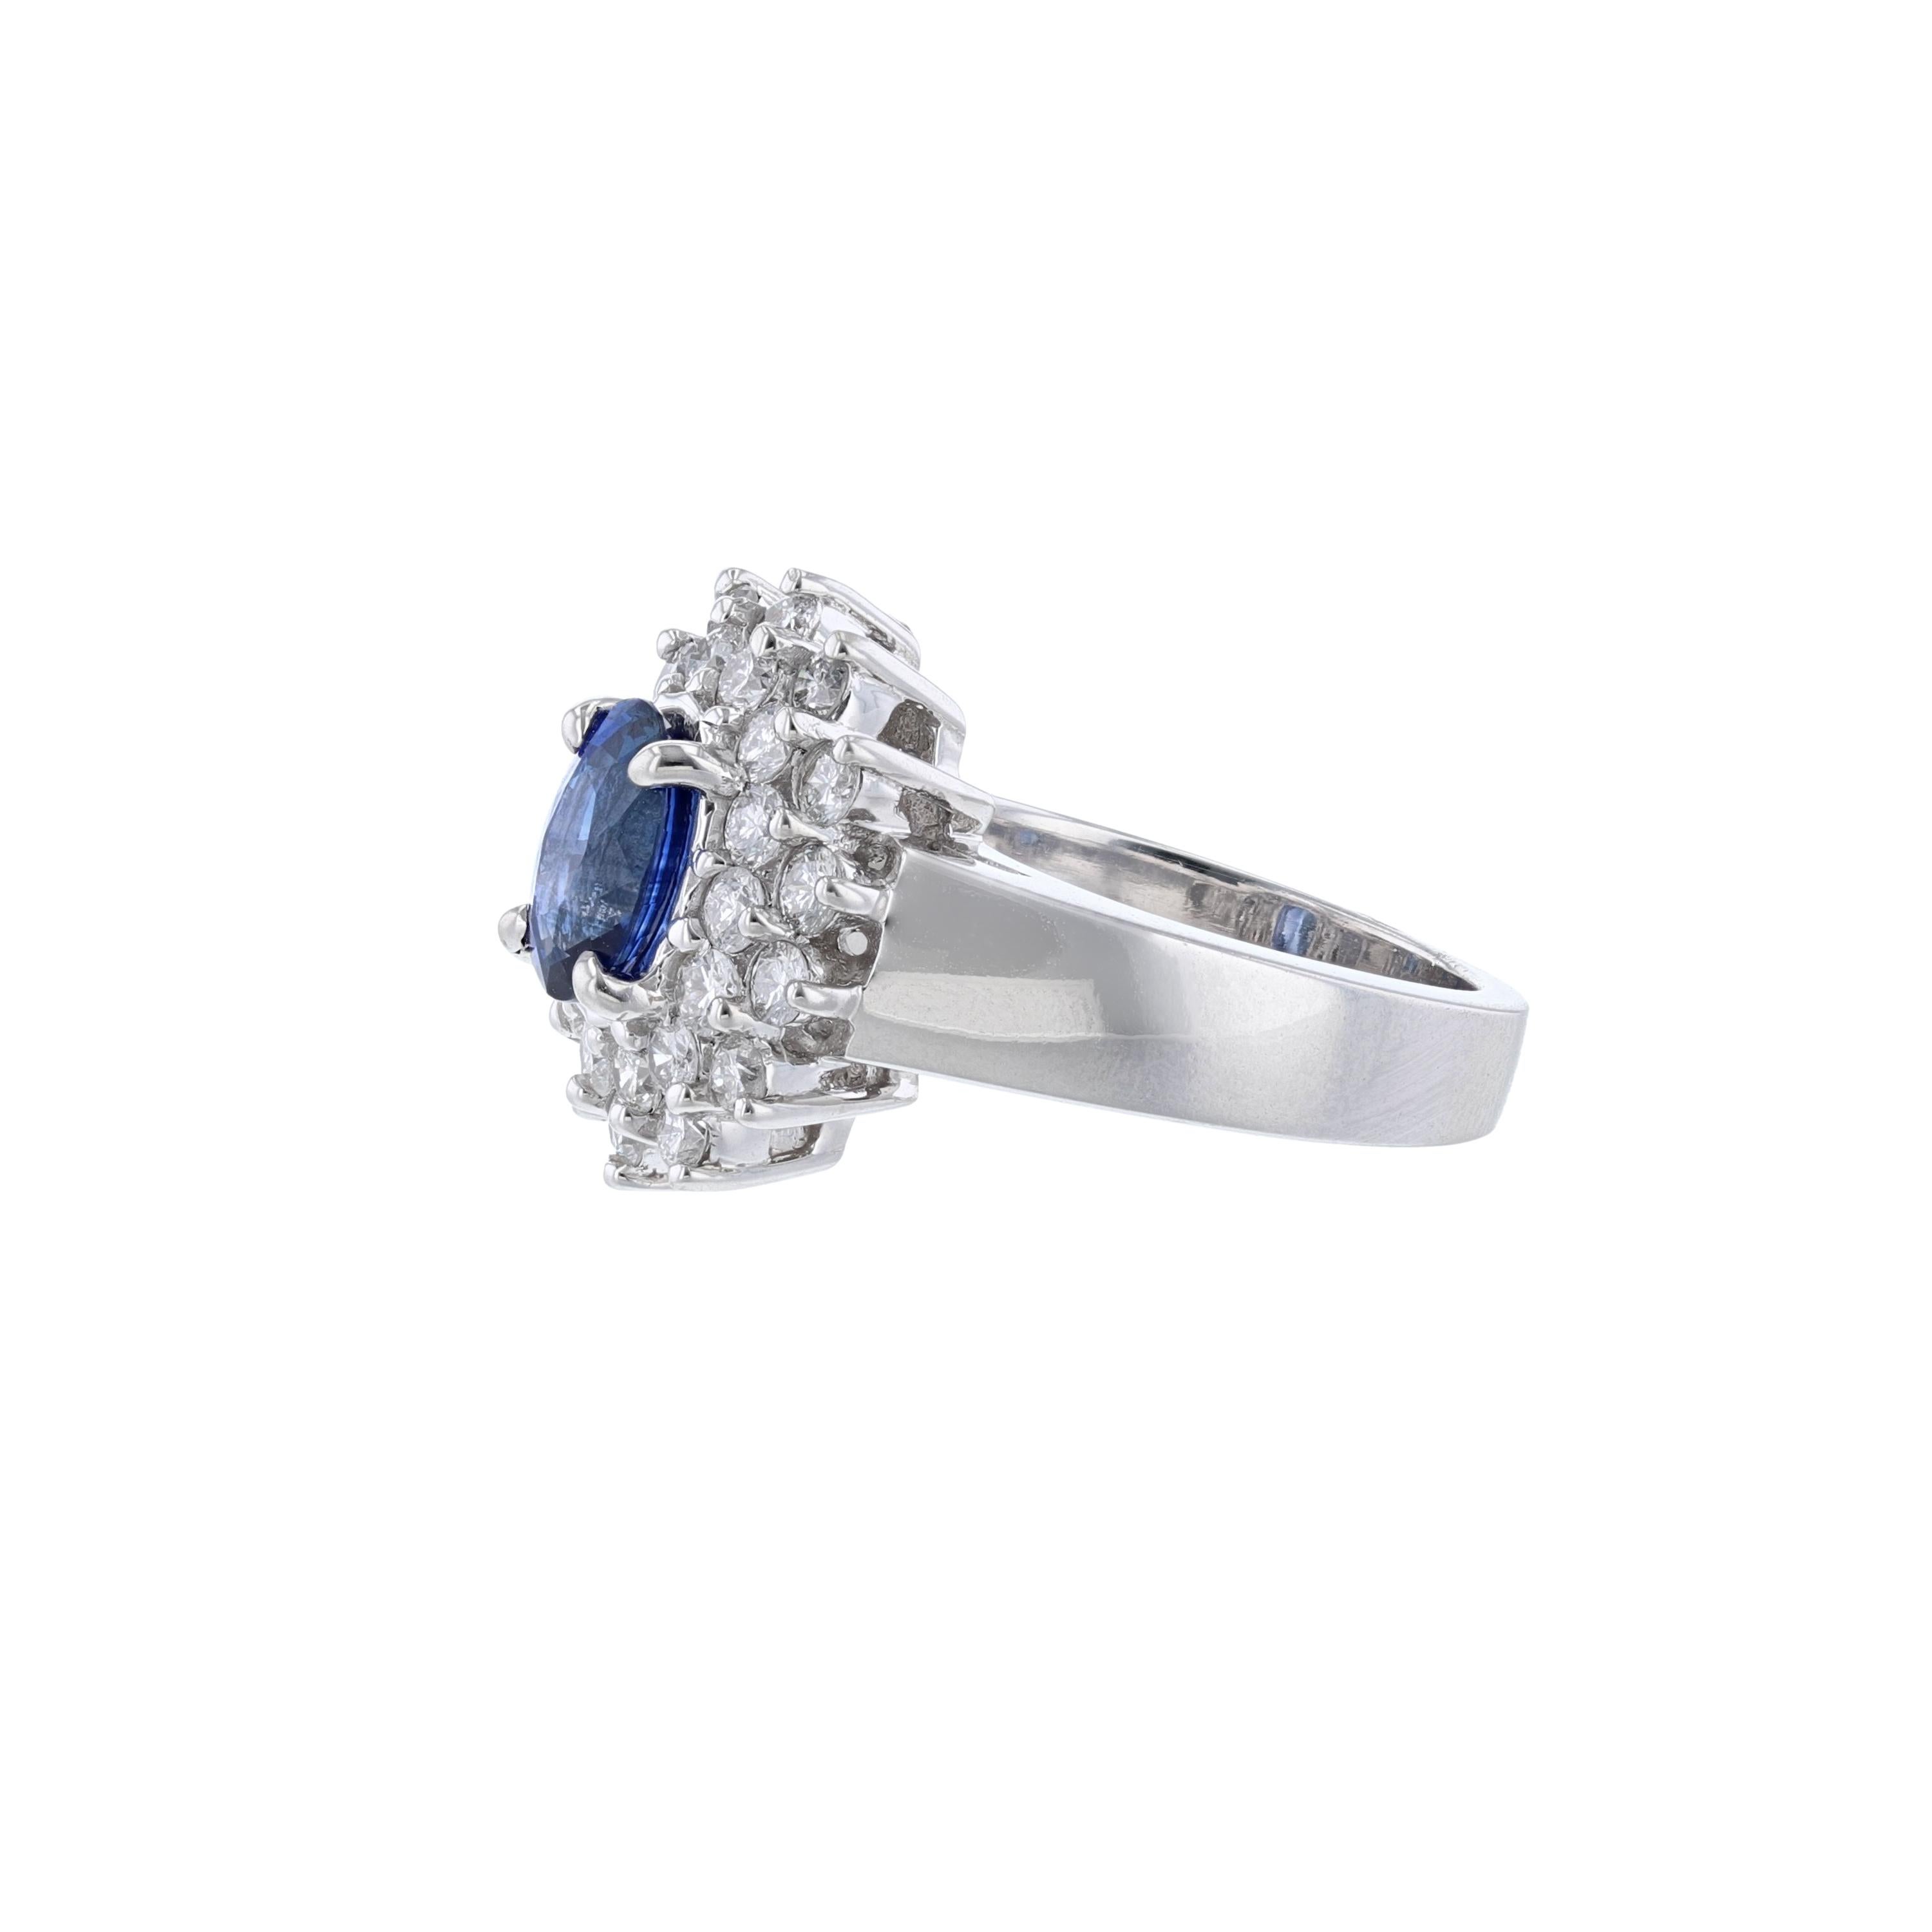 This ring is in 14K white gold. It features 1 oval-cut blue sapphire weighing 1.60. It also features 28 round cut diamonds weighing 1.14 carats. With a color grade (H) and clarity grade (SI2). All stones are prong set 